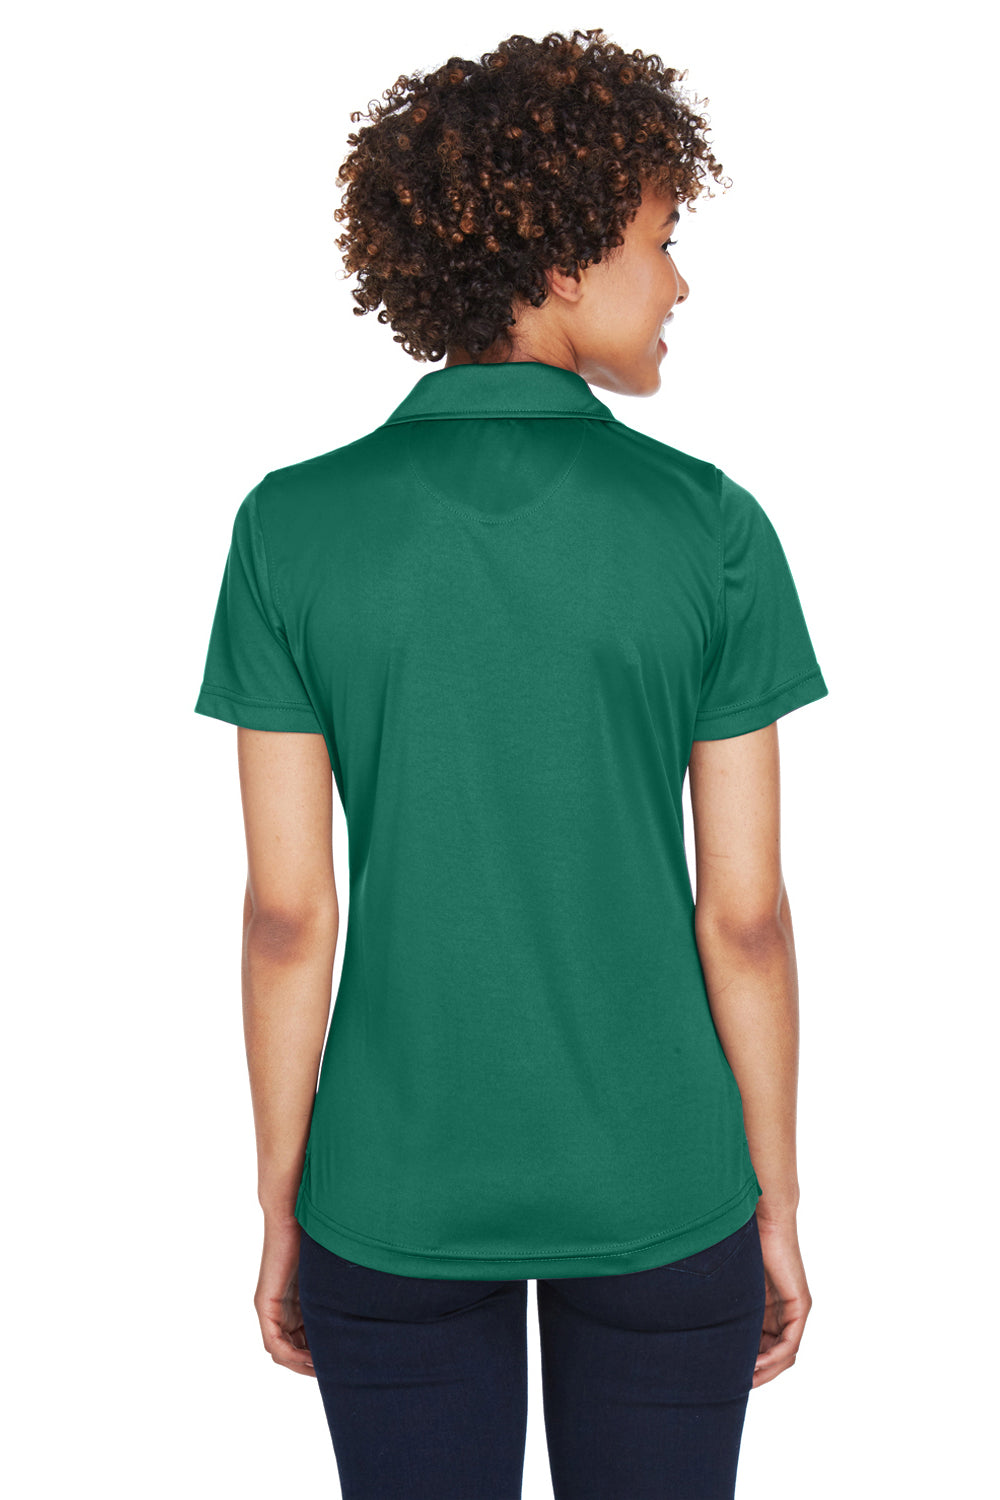 UltraClub 8425L Womens Cool & Dry Performance Moisture Wicking Short Sleeve Polo Shirt Forest Green Back